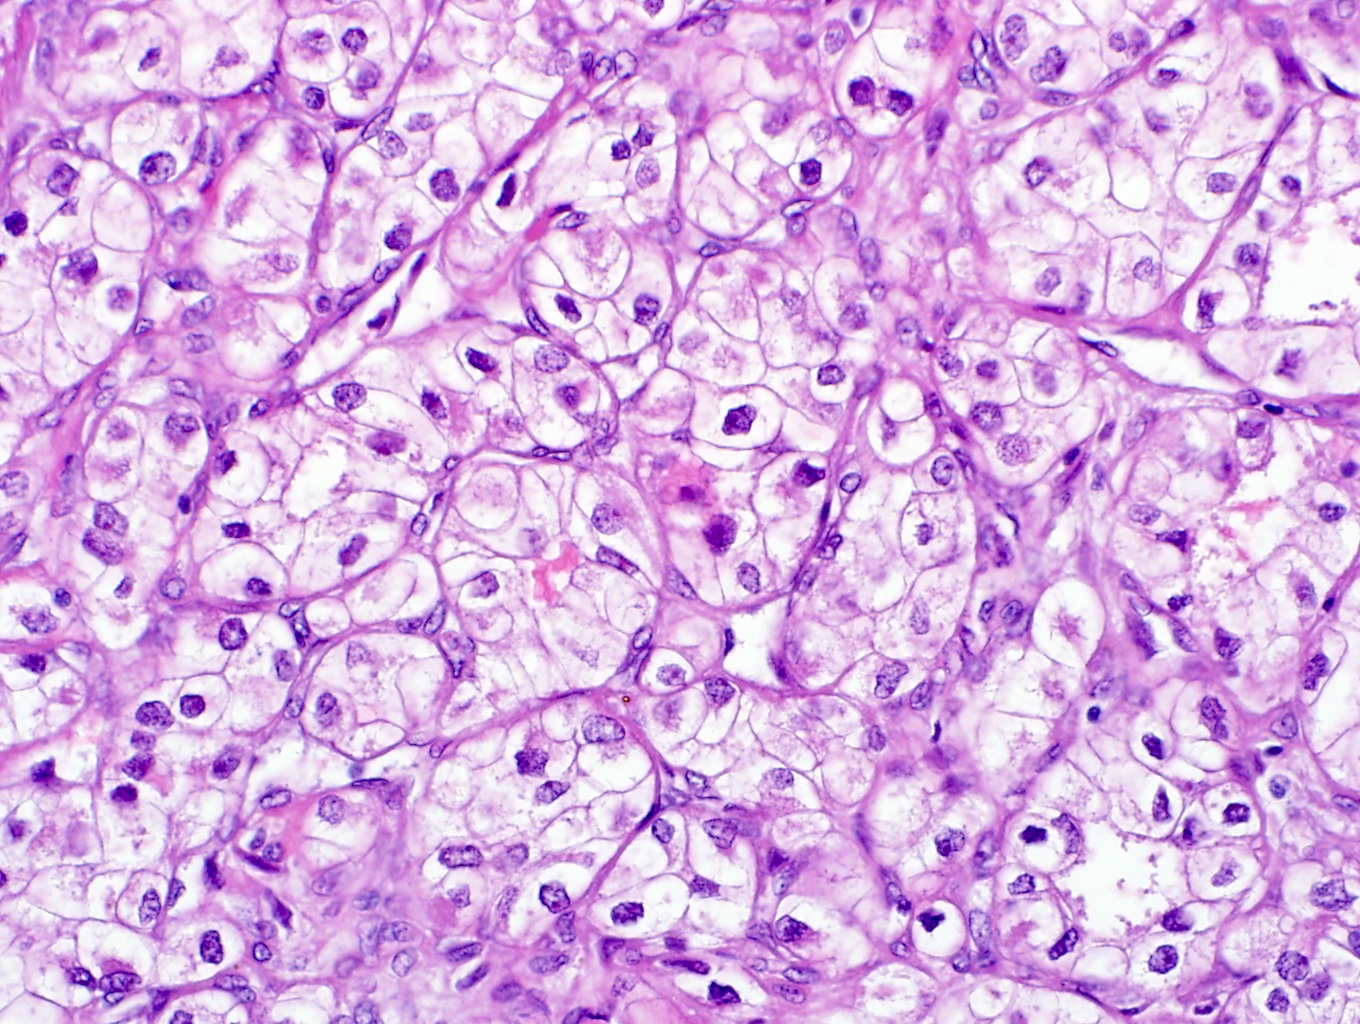 Metastatic clear cell renal cell carcinoma